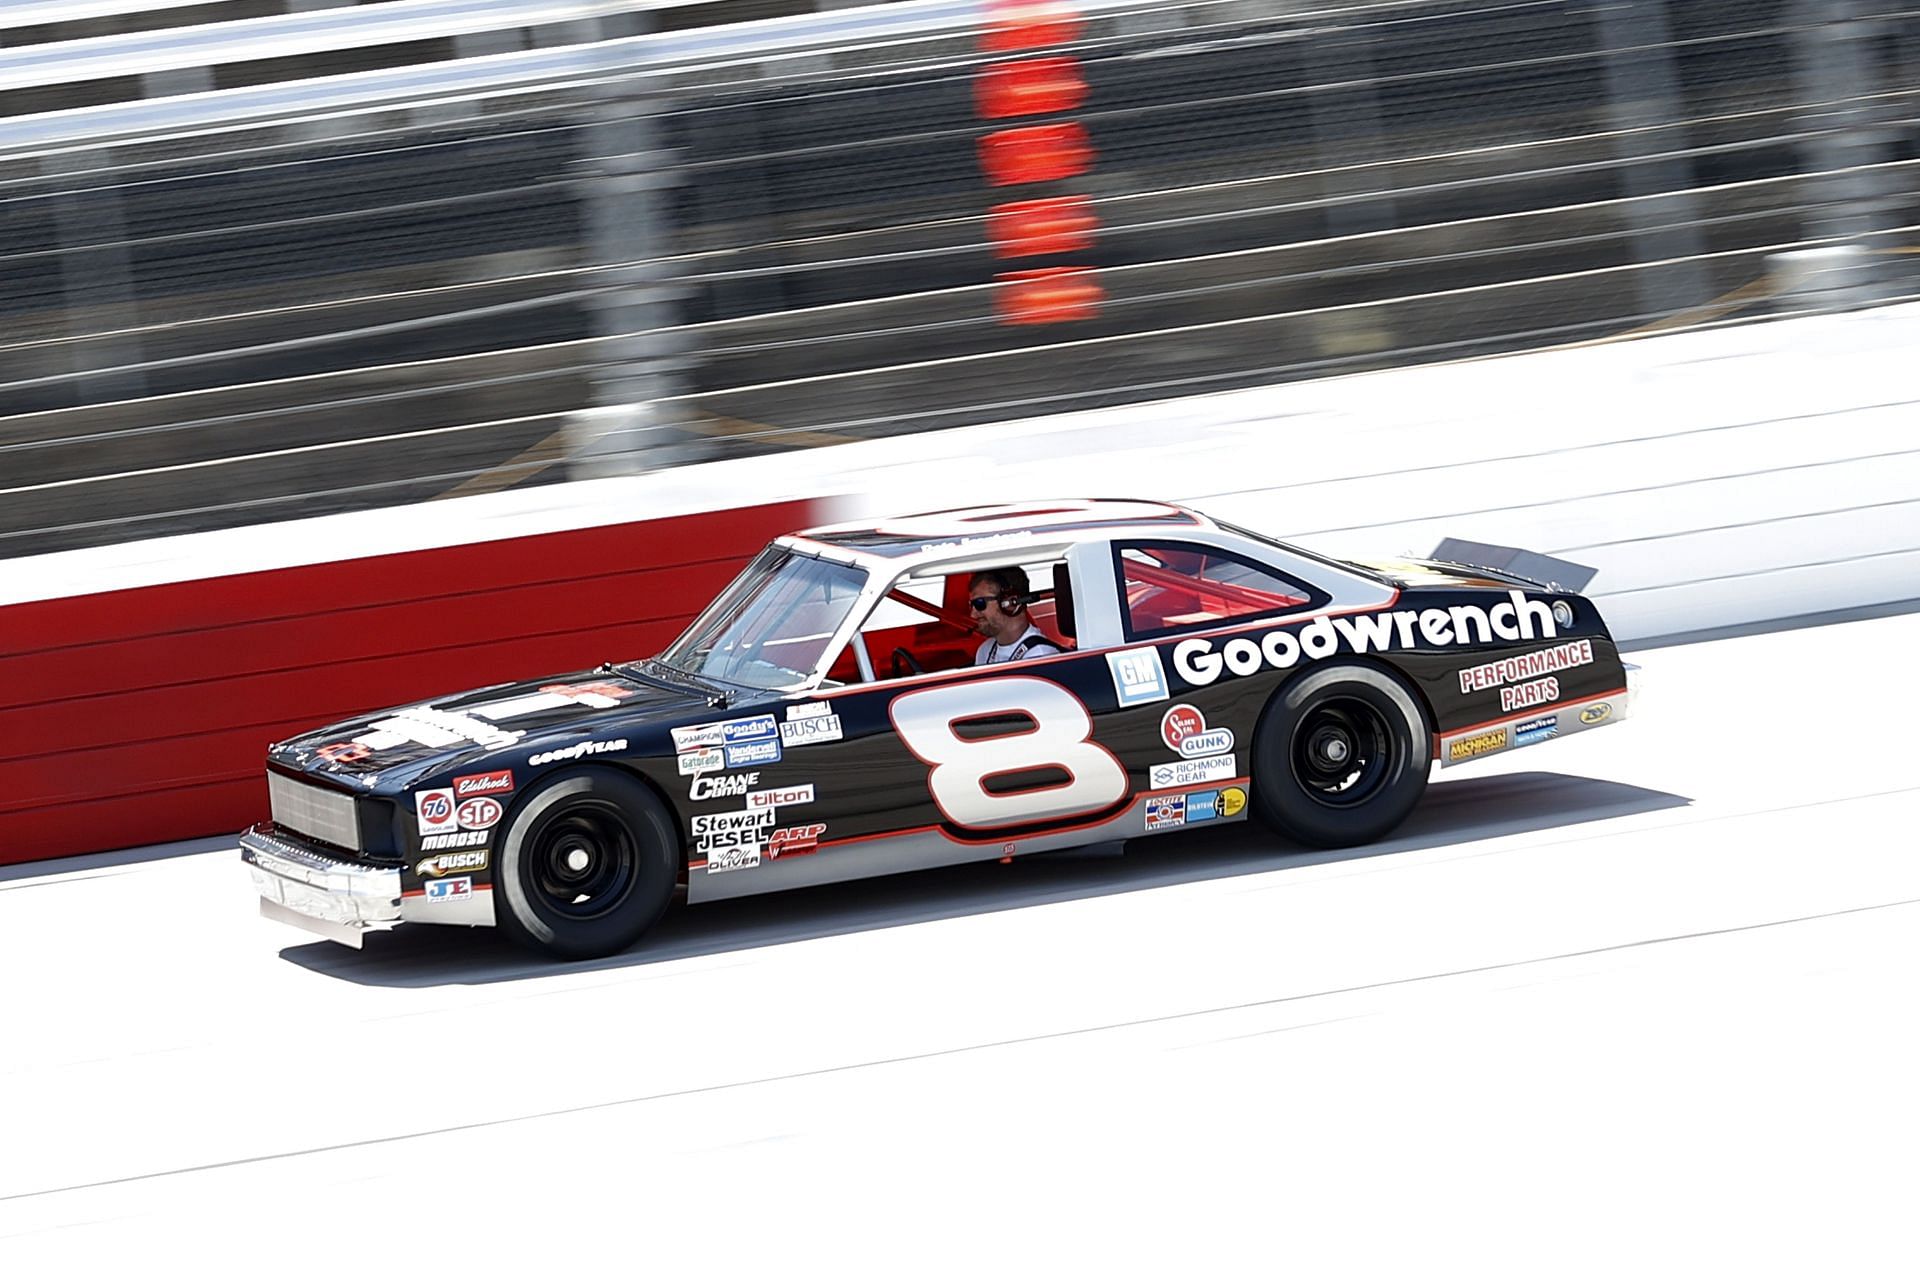 Dale Earnhardt Jr. leads the pace lap in his father&rsquo;s, Dale Earnhardt #8 Chevrolet before the 2021 NASCAR Xfinity Series Steakhouse Elite 200 at Darlington Raceway in Darlington, South Carolina. (Photo by Chris Graythen/Getty Images)